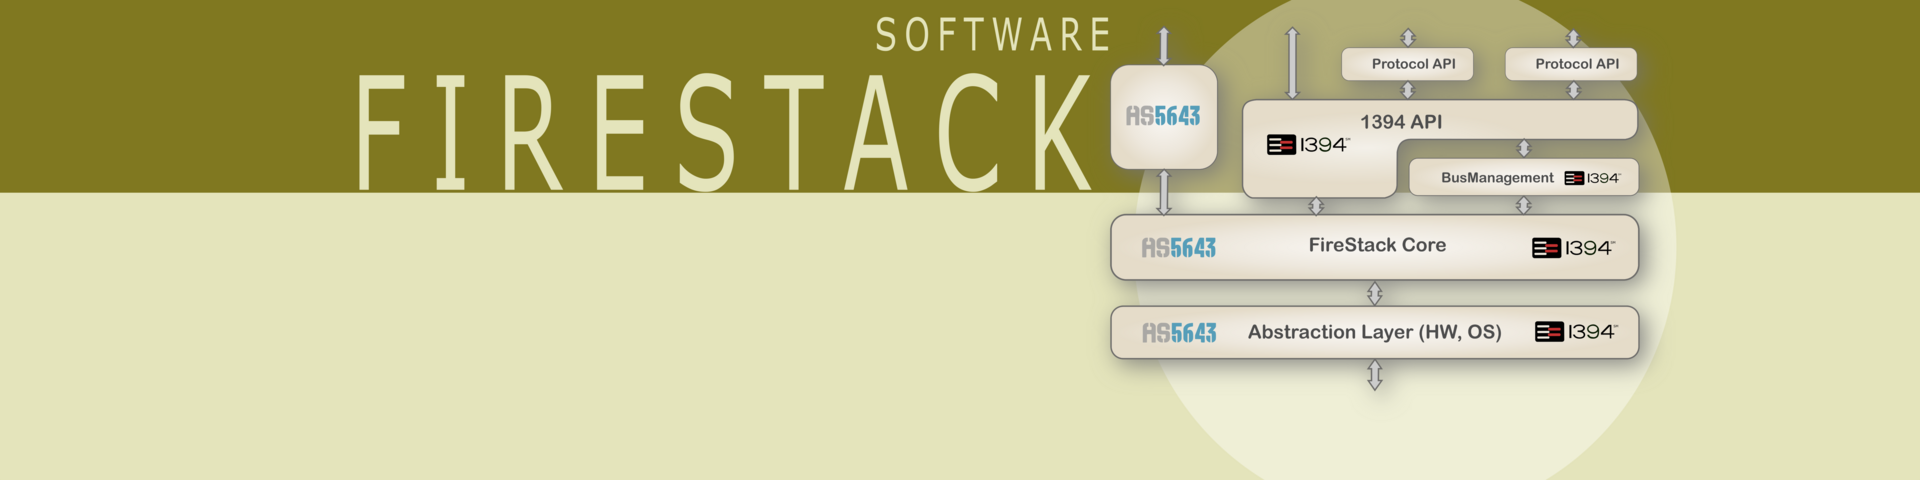 1394 and AS5643 Software - FireStack